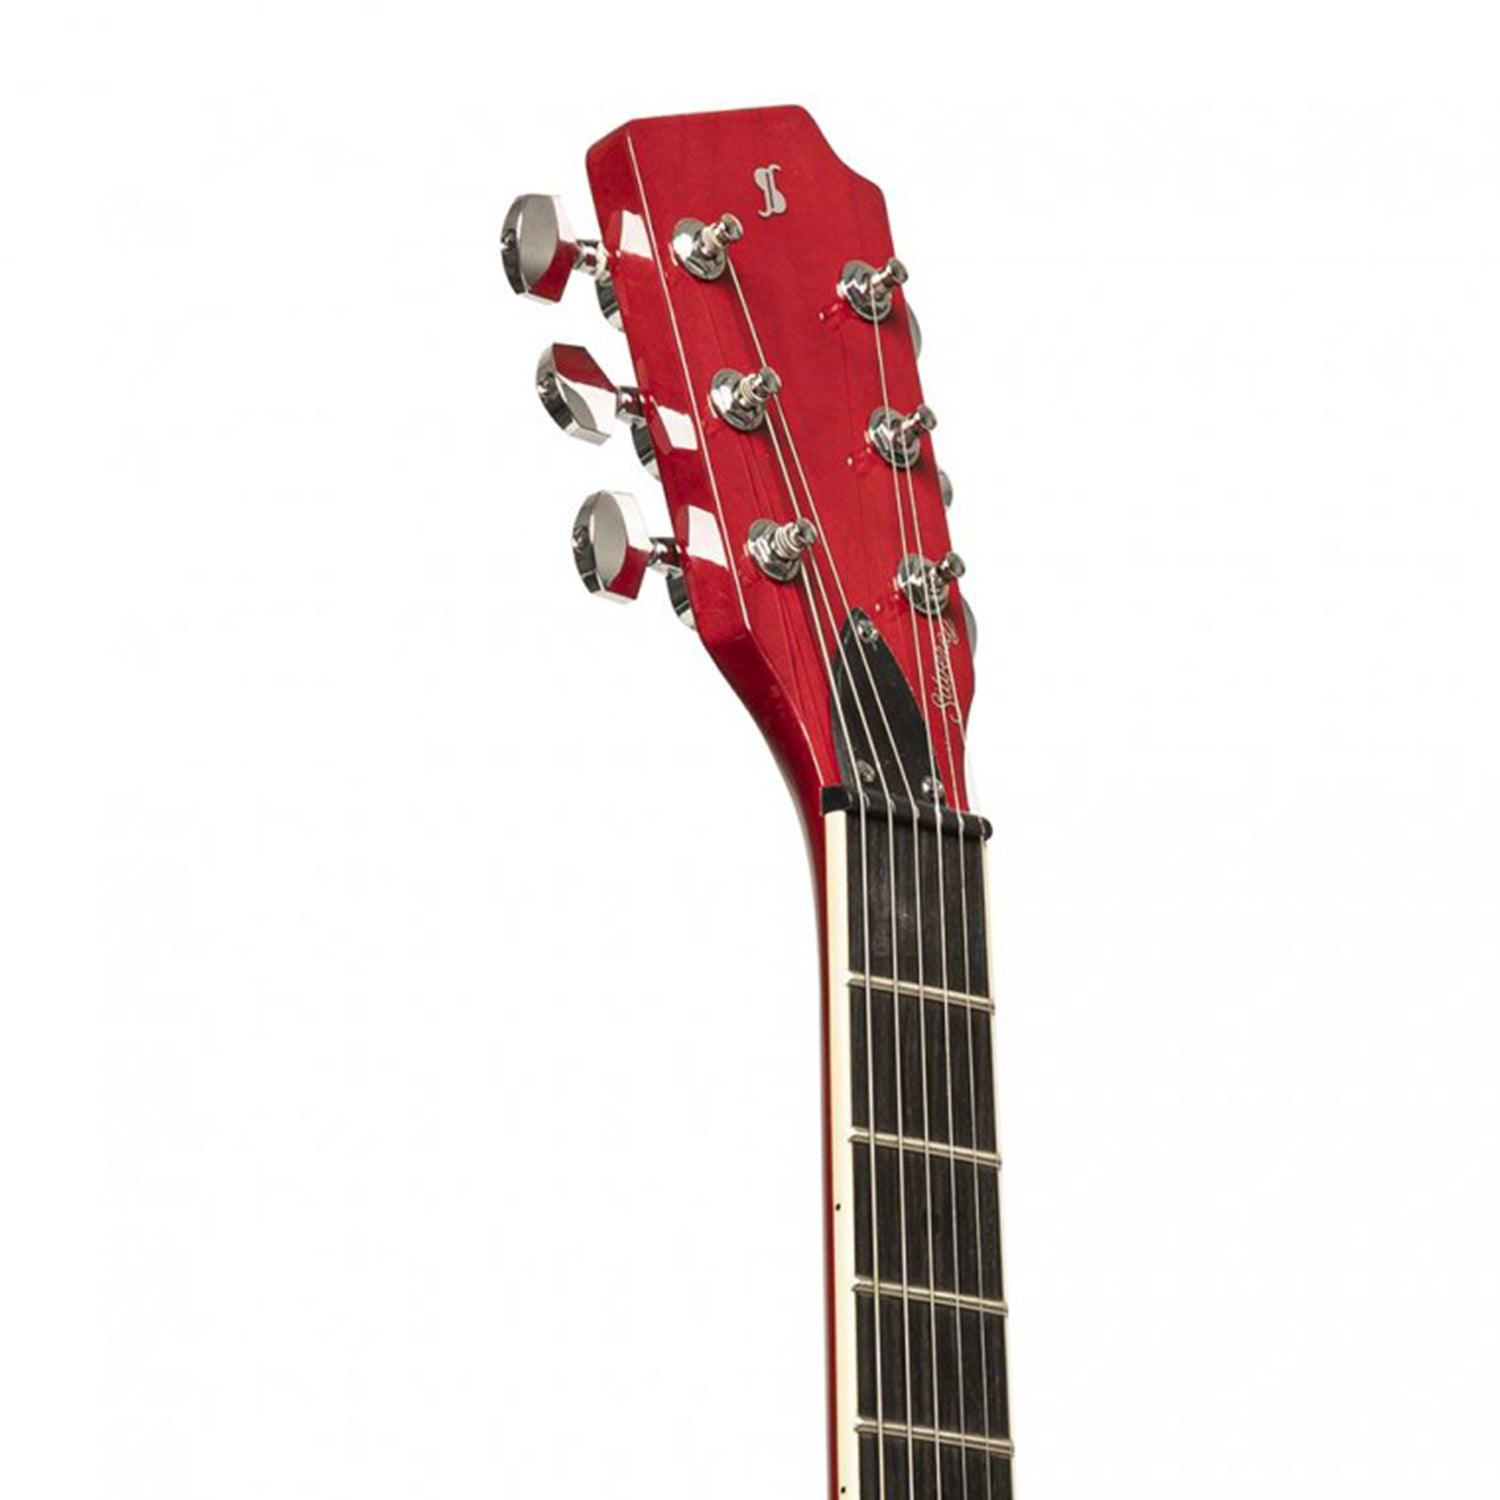 Stagg SVY 533 TCH Silveray series 533 model Electric Guitar with chambered maple body - DY Pro Audio